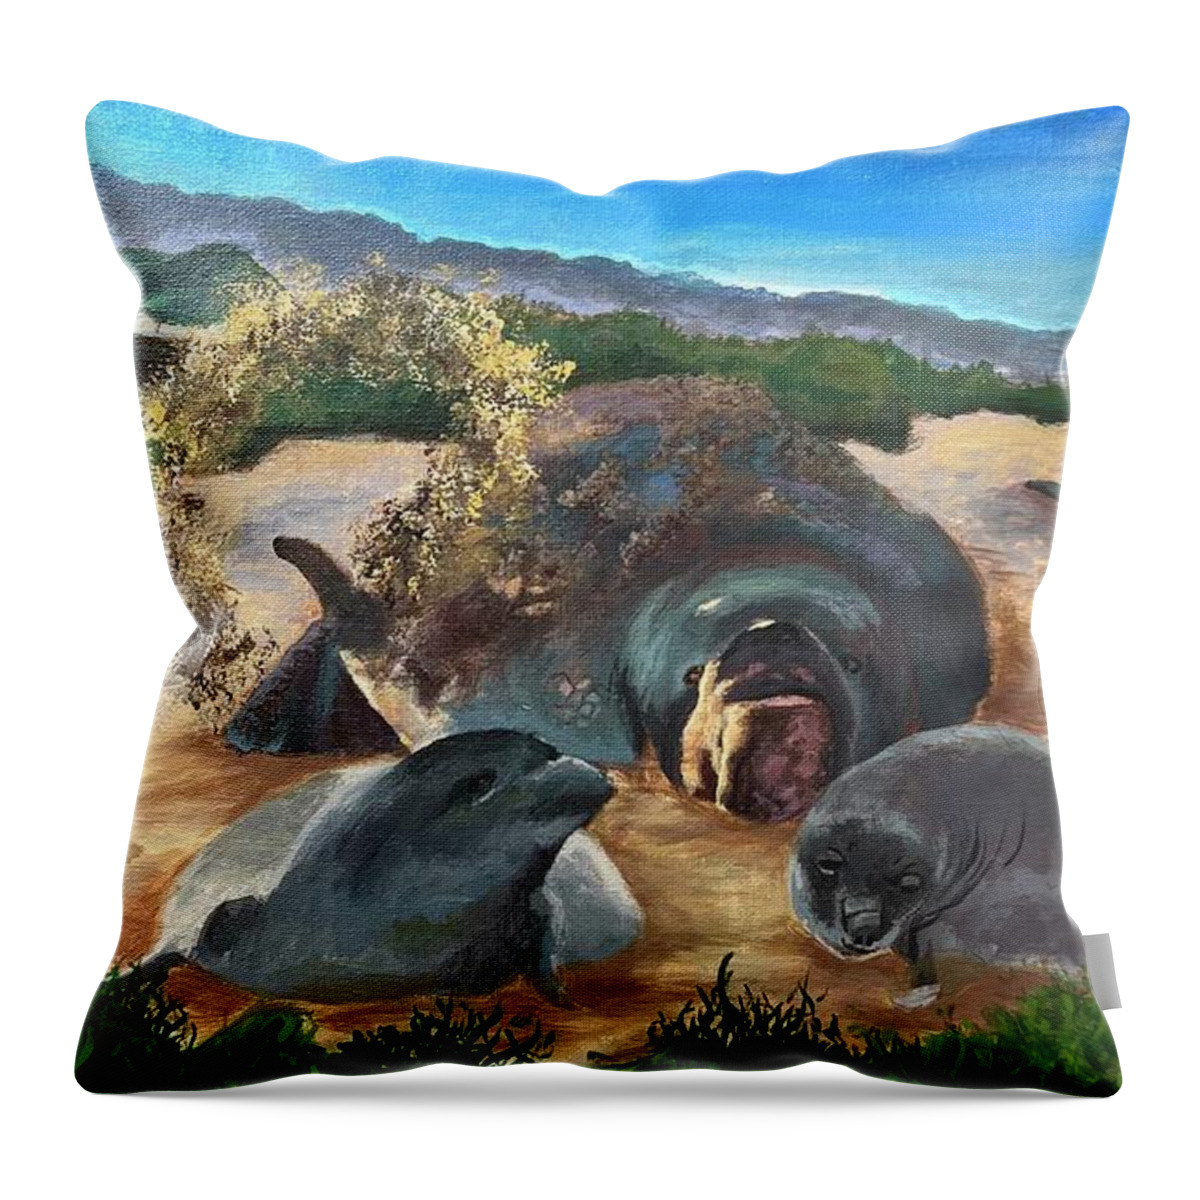 Elephant Seal Throw Pillow featuring the painting The Natural Sun Block for Elephant Seals by Sarah Du Grade 6 by California Coastal Commission